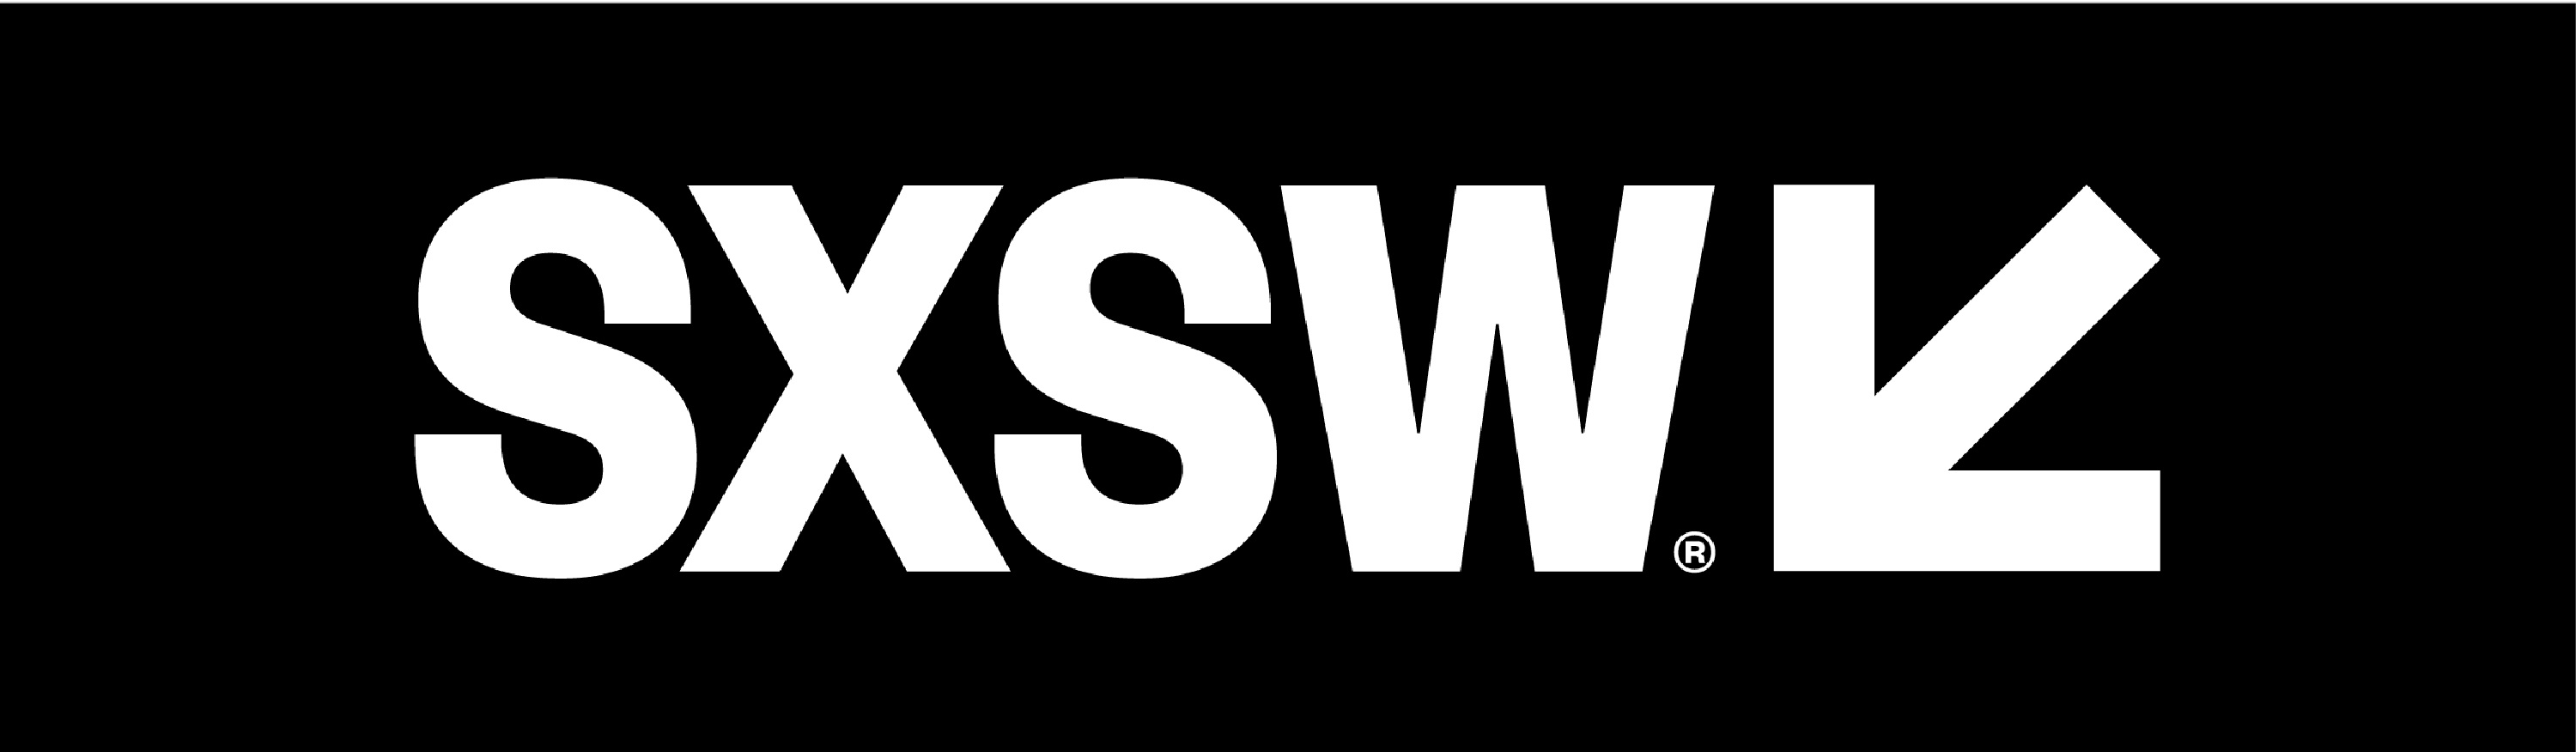 SXSW Announces Keynote Stacey Abrams and New Round of Featured Speakers